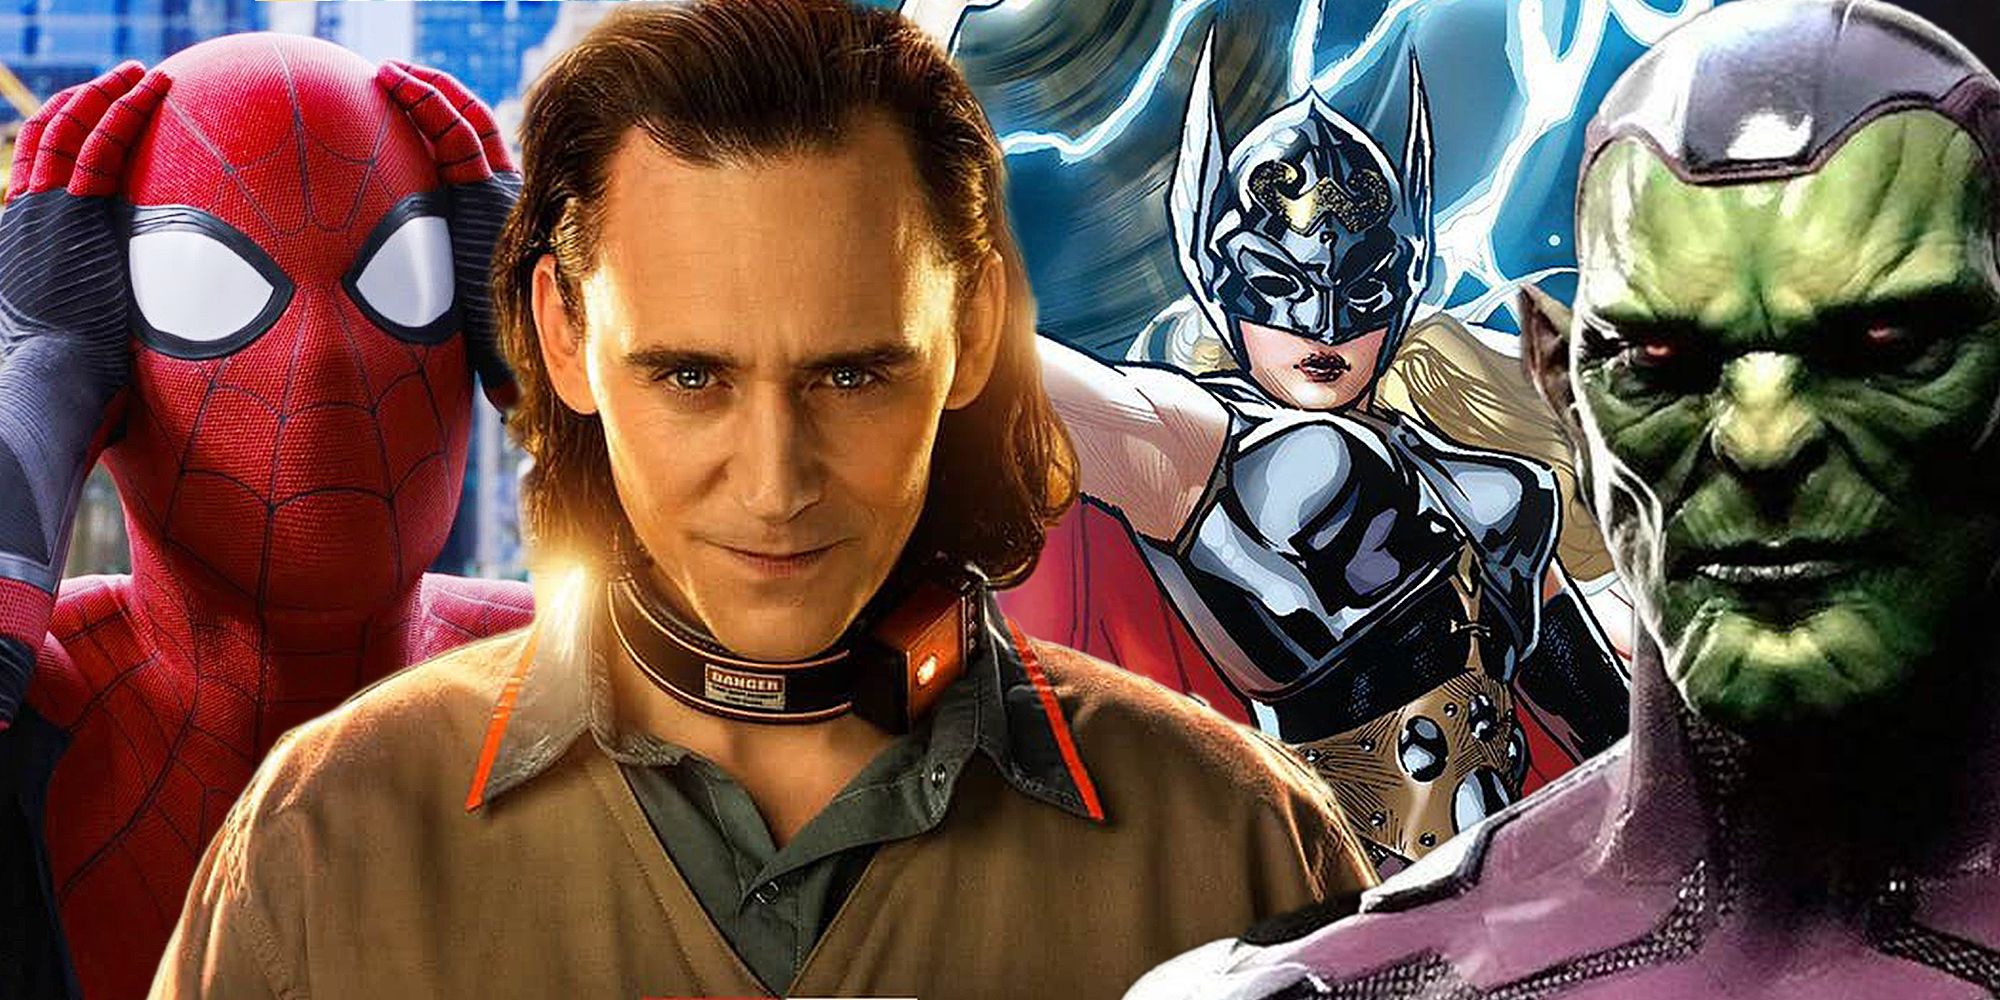 Spider-Man No Way Home, Loki, Thor Love and Thunder, and Secret Invasion in MCU Phase 4